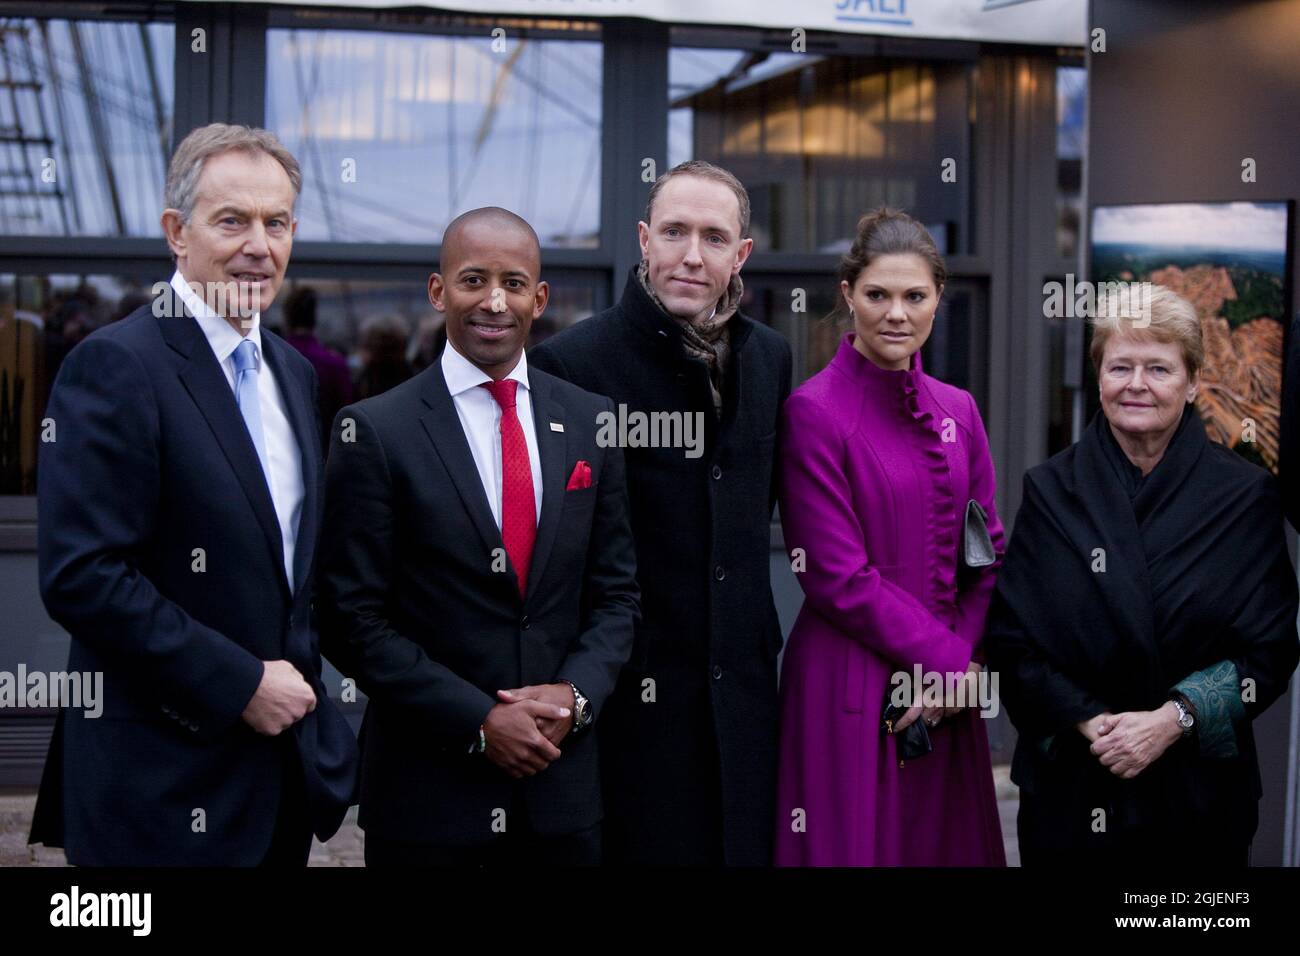 Photographer Mattias Klum, Britain's former Prime Minister Tony Blair, Managing director in the Swedish Postcode Lottery Niclas Kjellstrom-Matseke and Sweden's Crown Princess Victoria at the photo exhibition 'The Testament of Tebaran' in connection with a seminar 'Fighting Deforestation', which was held at the Admiral Hotel in Nyhavn, Copenhagen Stock Photo